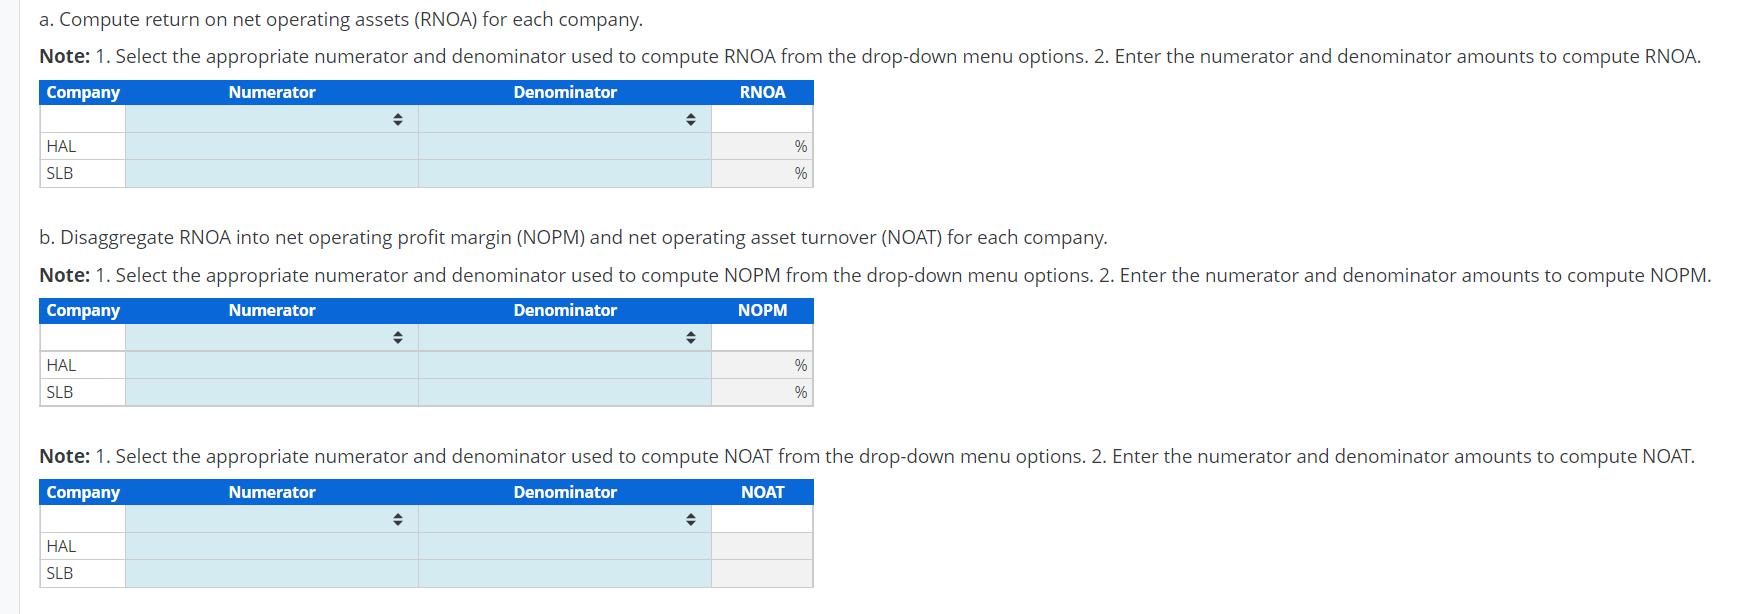 b. Disaggregate RNOA into net operating profit margin (NOPM) and net operating asset turnover (NOAT) for each company.